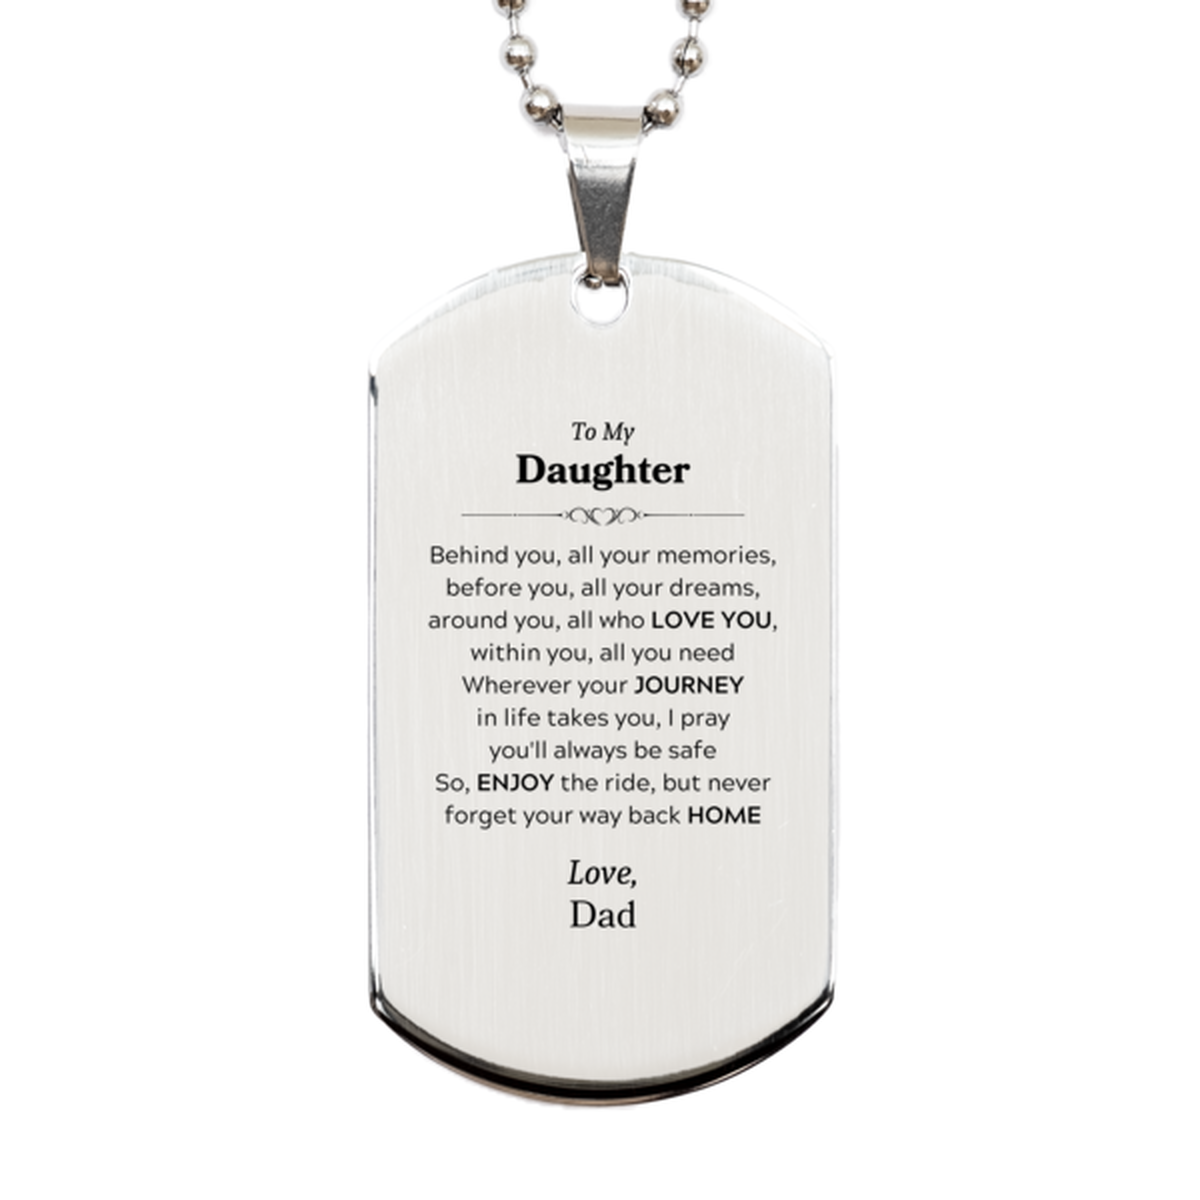 To My Daughter Graduation Gifts from Dad, Daughter Silver Dog Tag Christmas Birthday Gifts for Daughter Behind you, all your memories, before you, all your dreams. Love, Dad